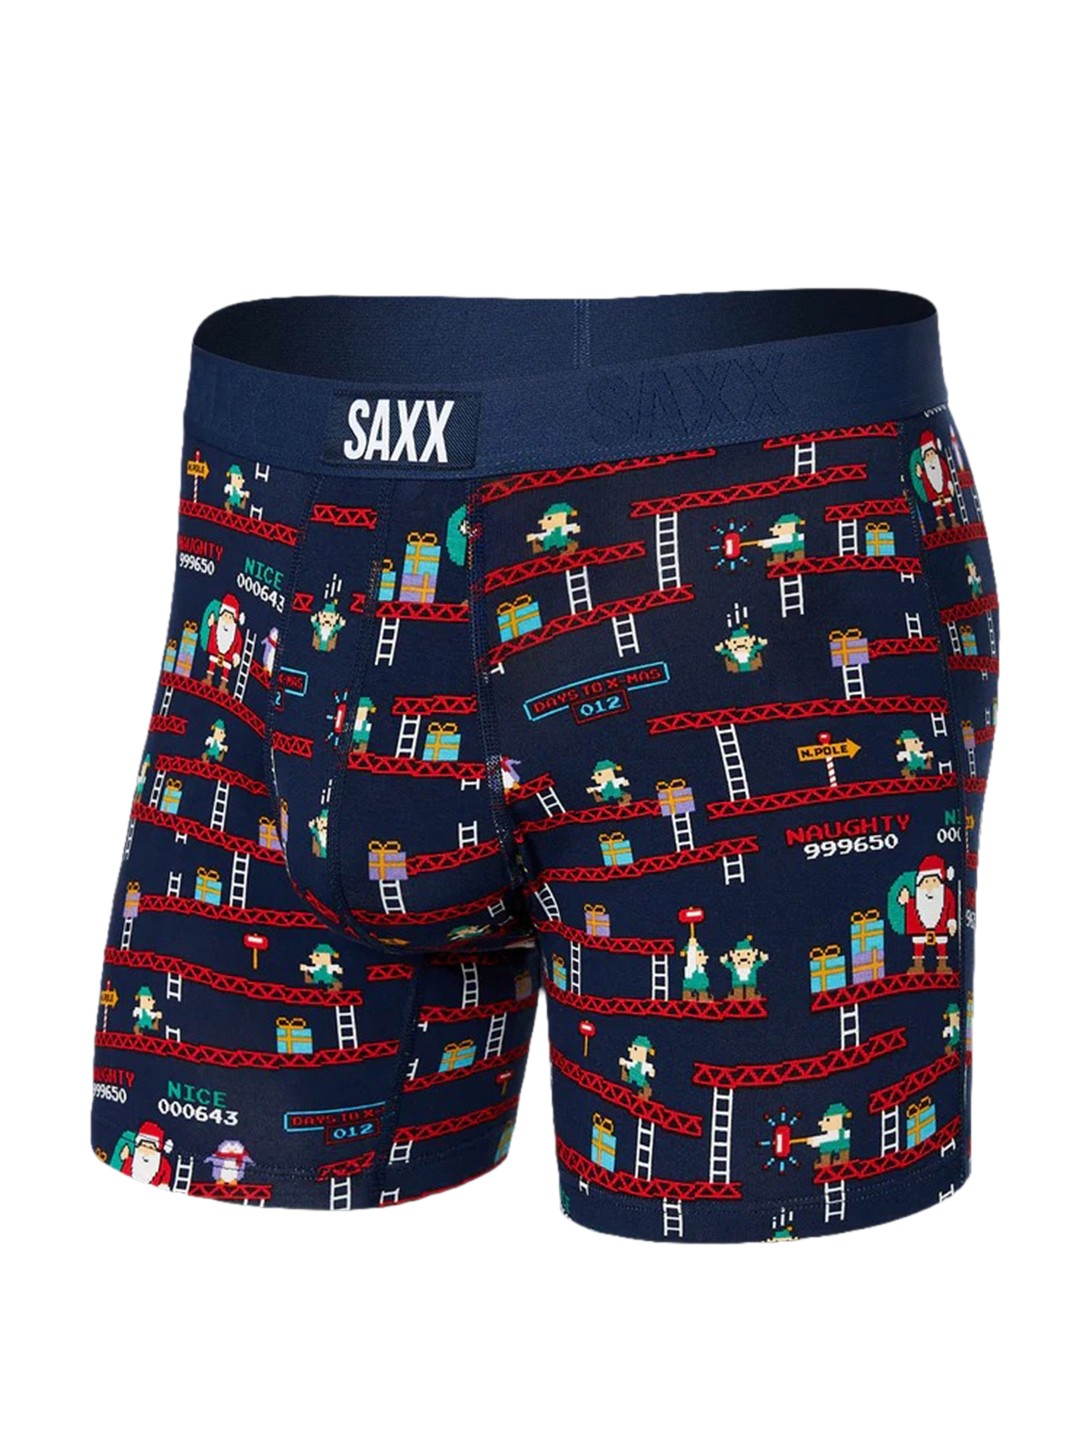 SAXX | Vibe Supersoft Boxer Brief - Santa's Workshop Navy | Over the ...